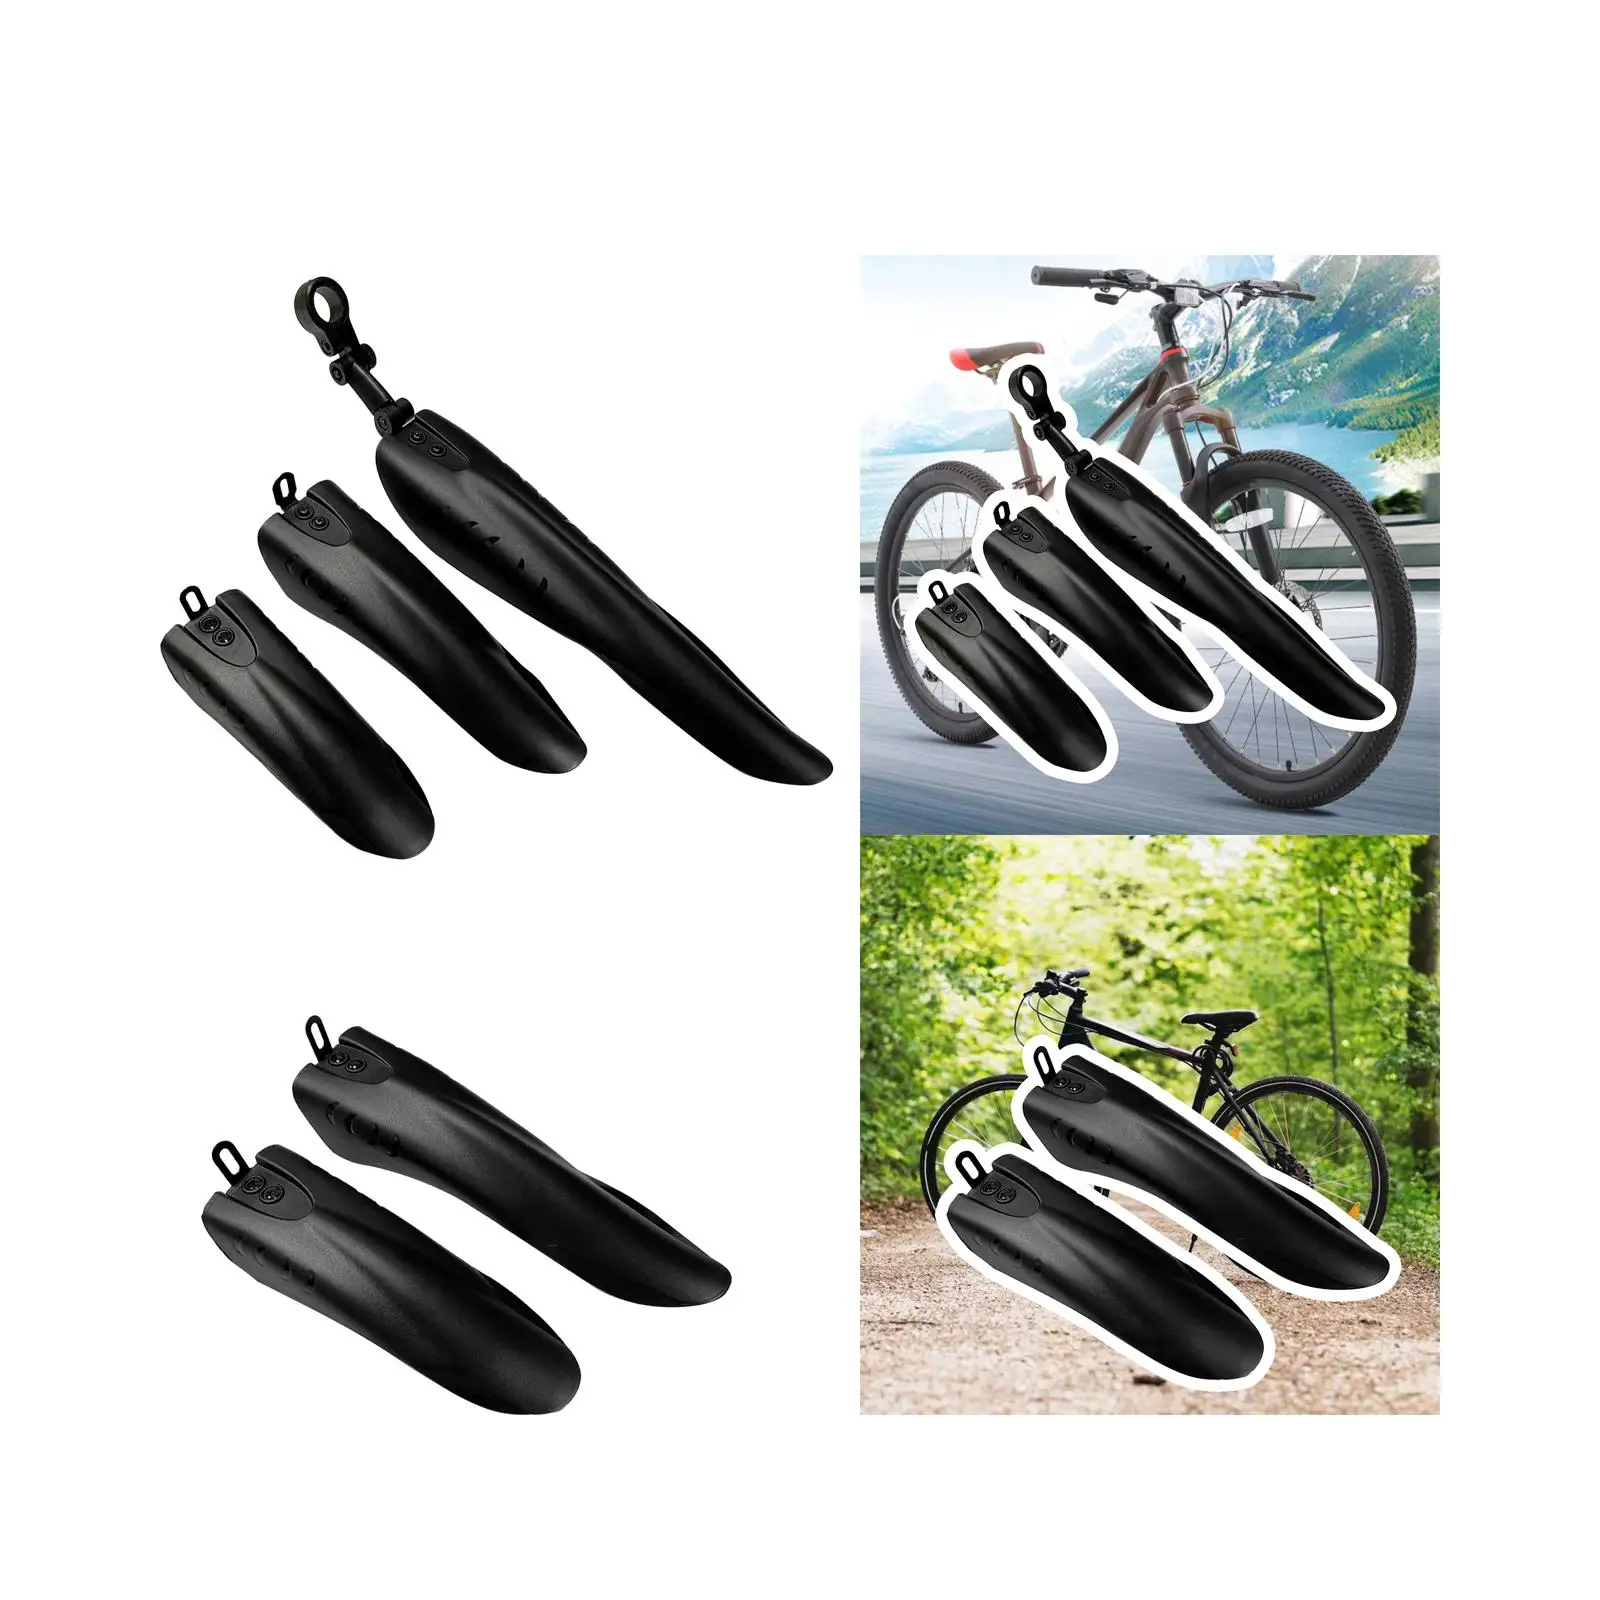 Mountain Bike Mudguard Set Mudflap Lightweight Replaces Easy to Install Fenders Mud Guard for Sports Mountain Bike